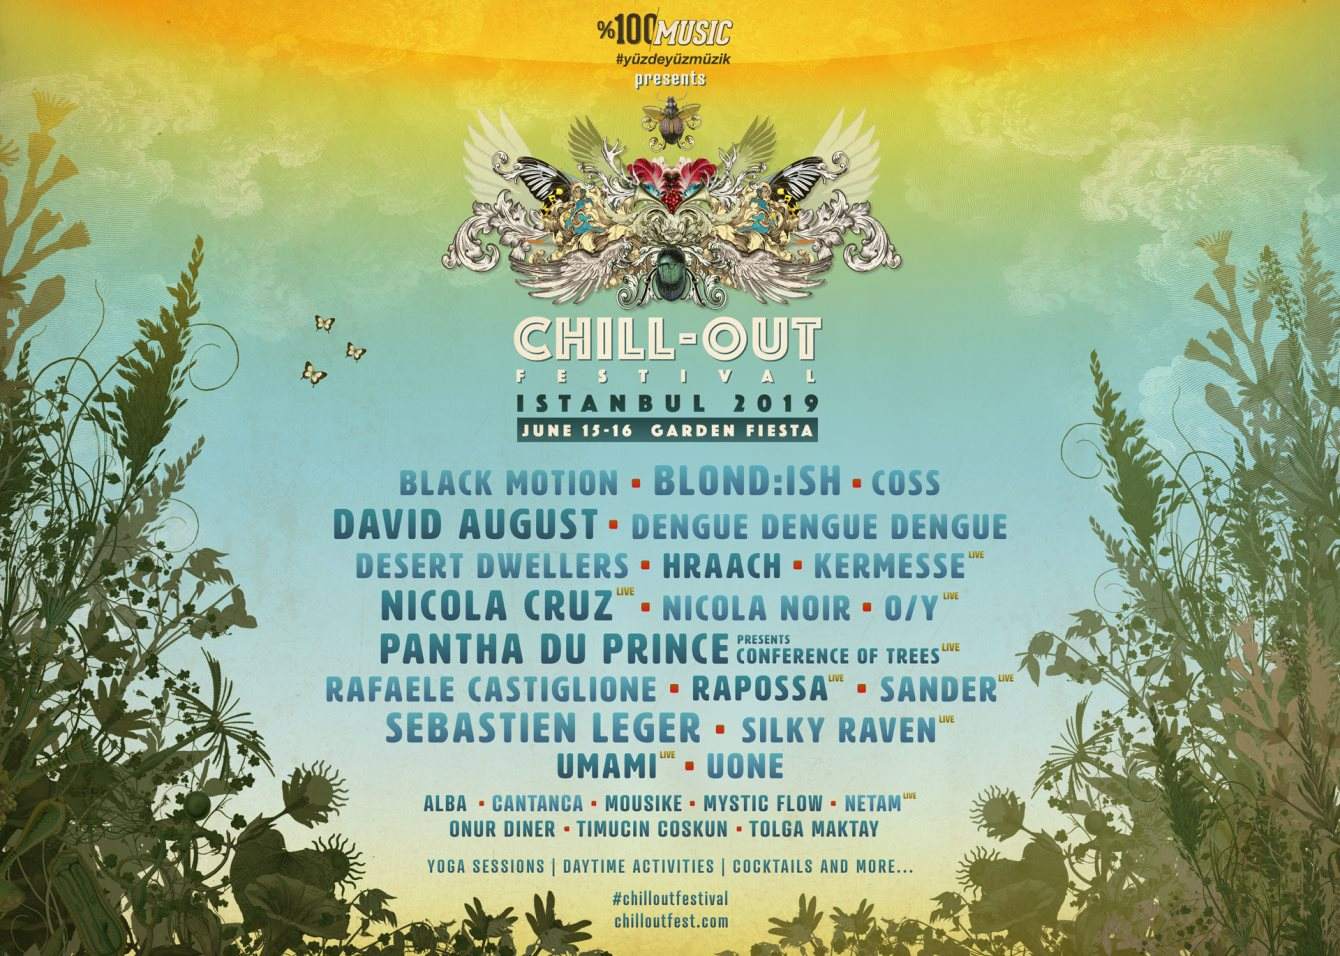 Chill-Out Festival Istanbul 2019 presented by 100% Music - Página frontal